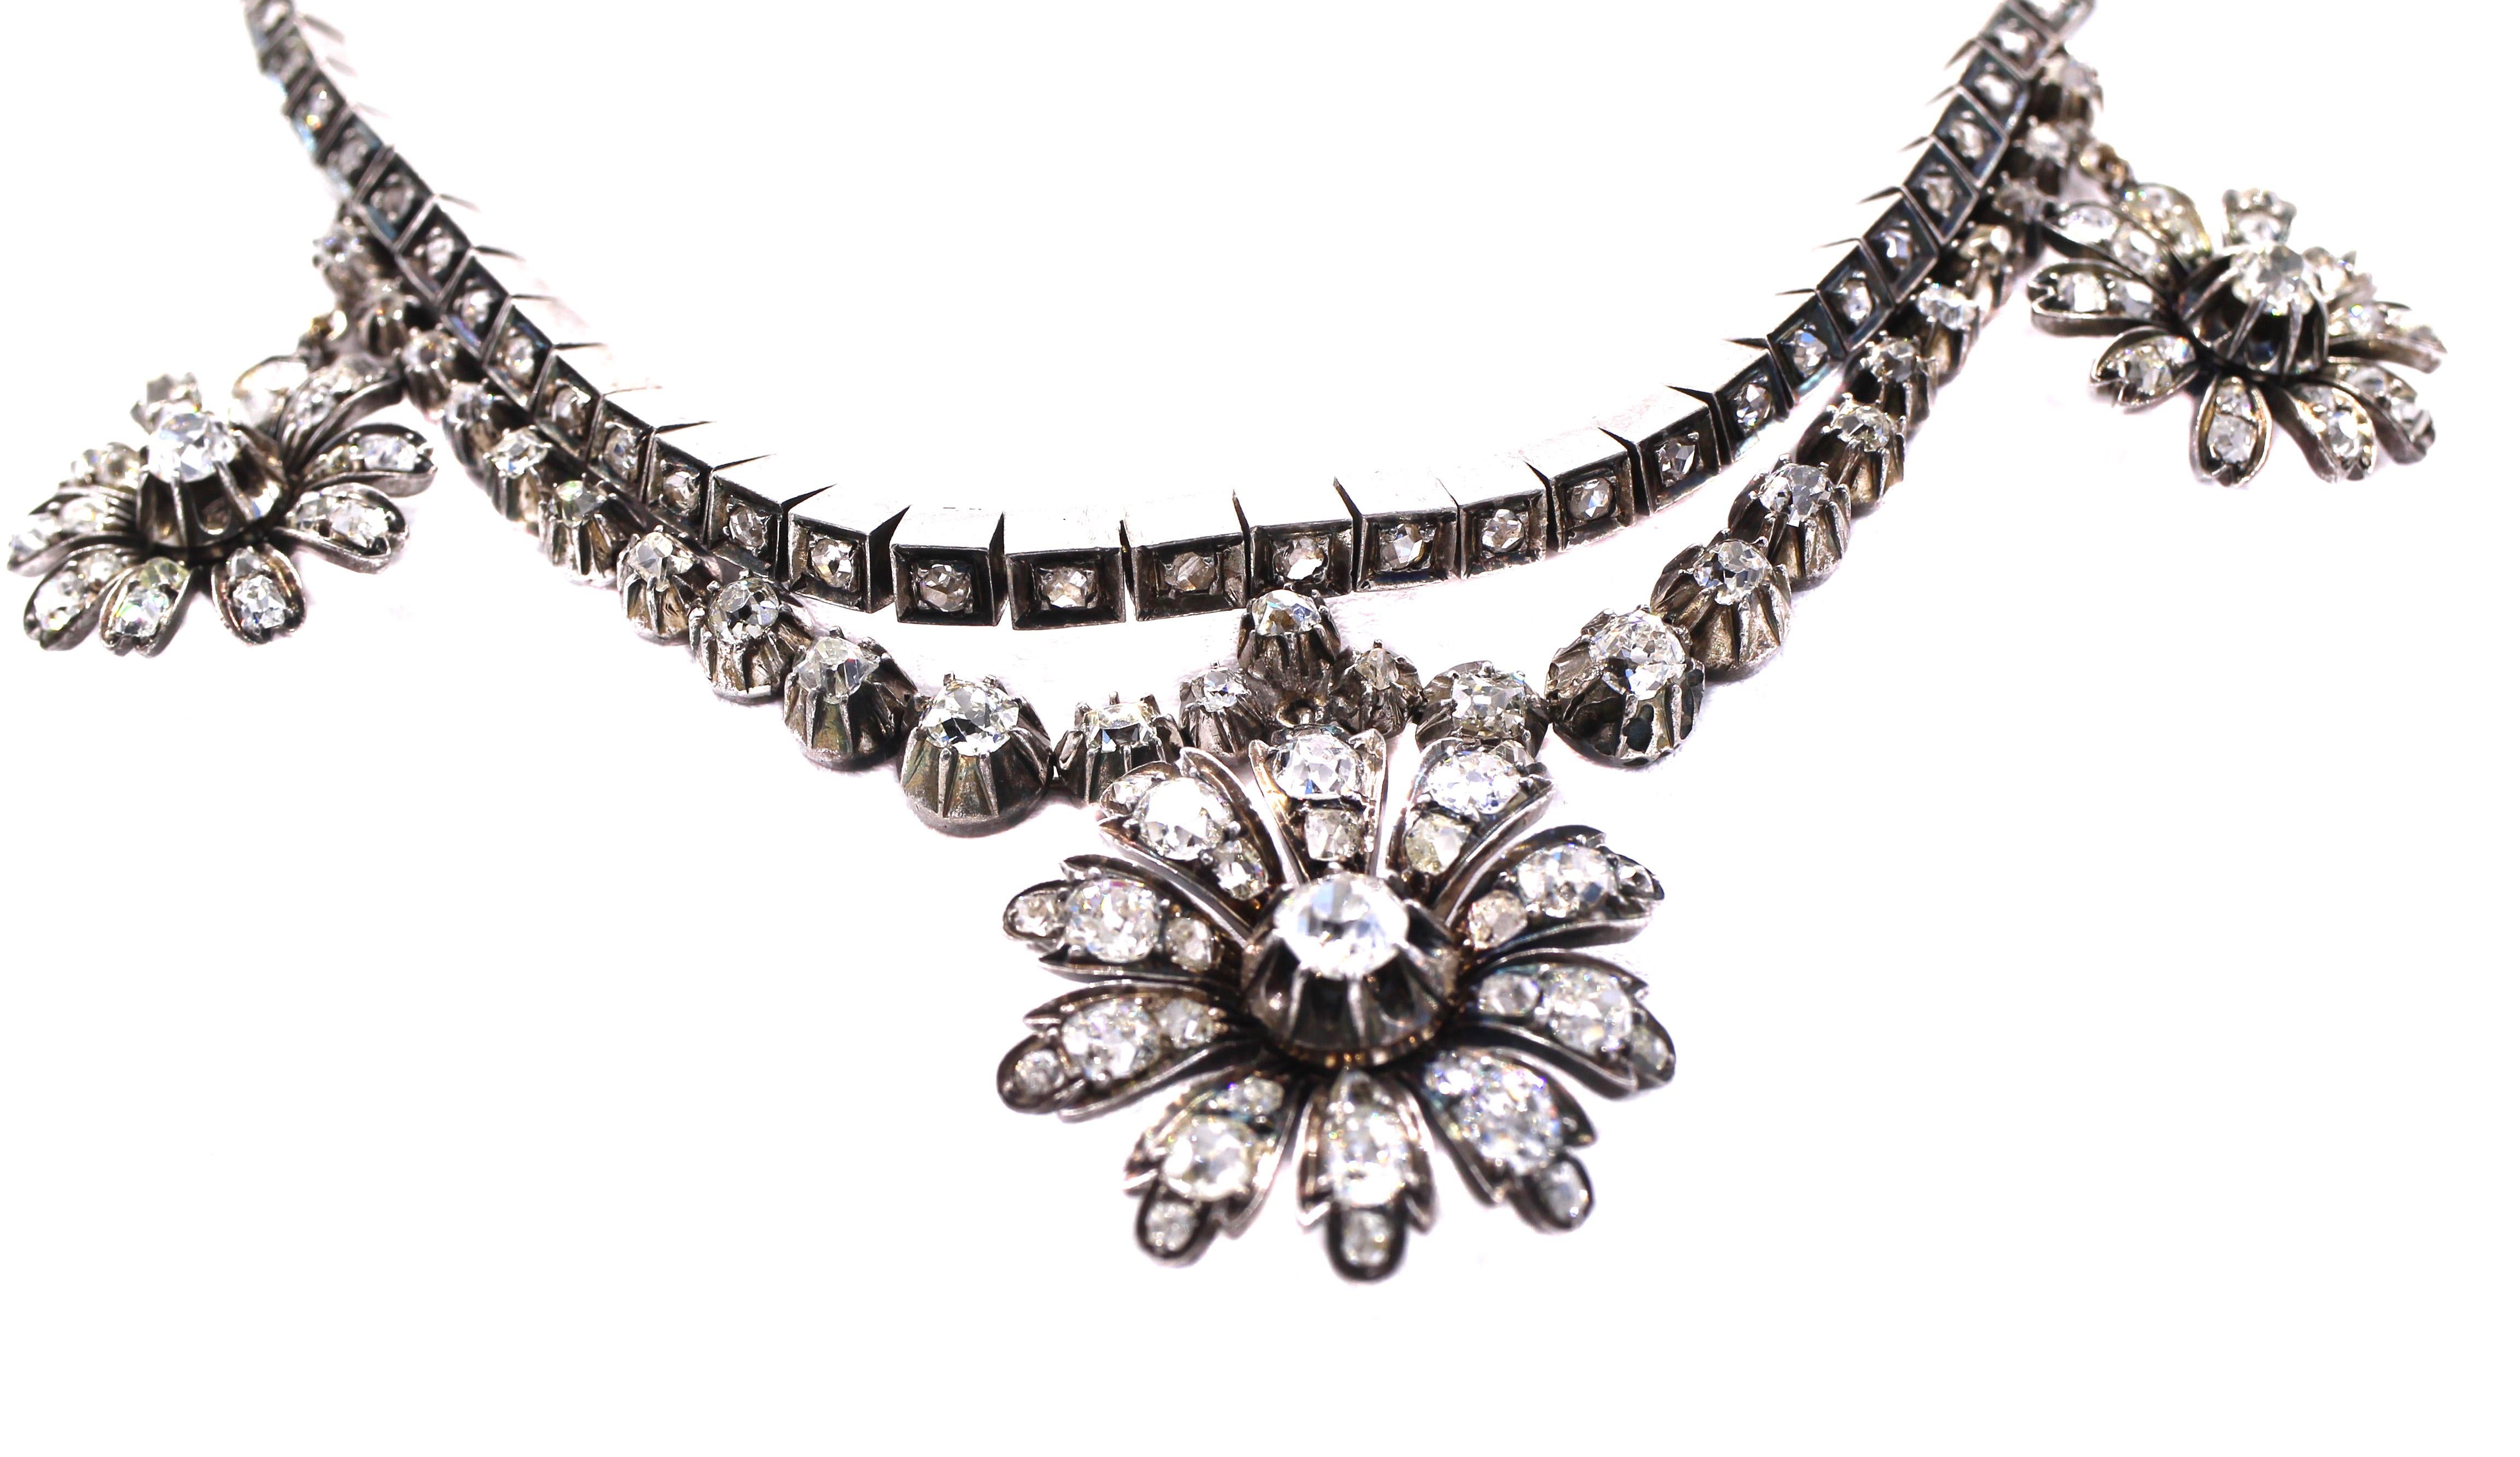 Beautifully designed and masterfully handcrafted in silver topped gold this lovely Victorian necklace from ca 1870 is a special piece of period jewelry. The necklace is set with small rose cut diamonds in boxes of silver topped gold with a second